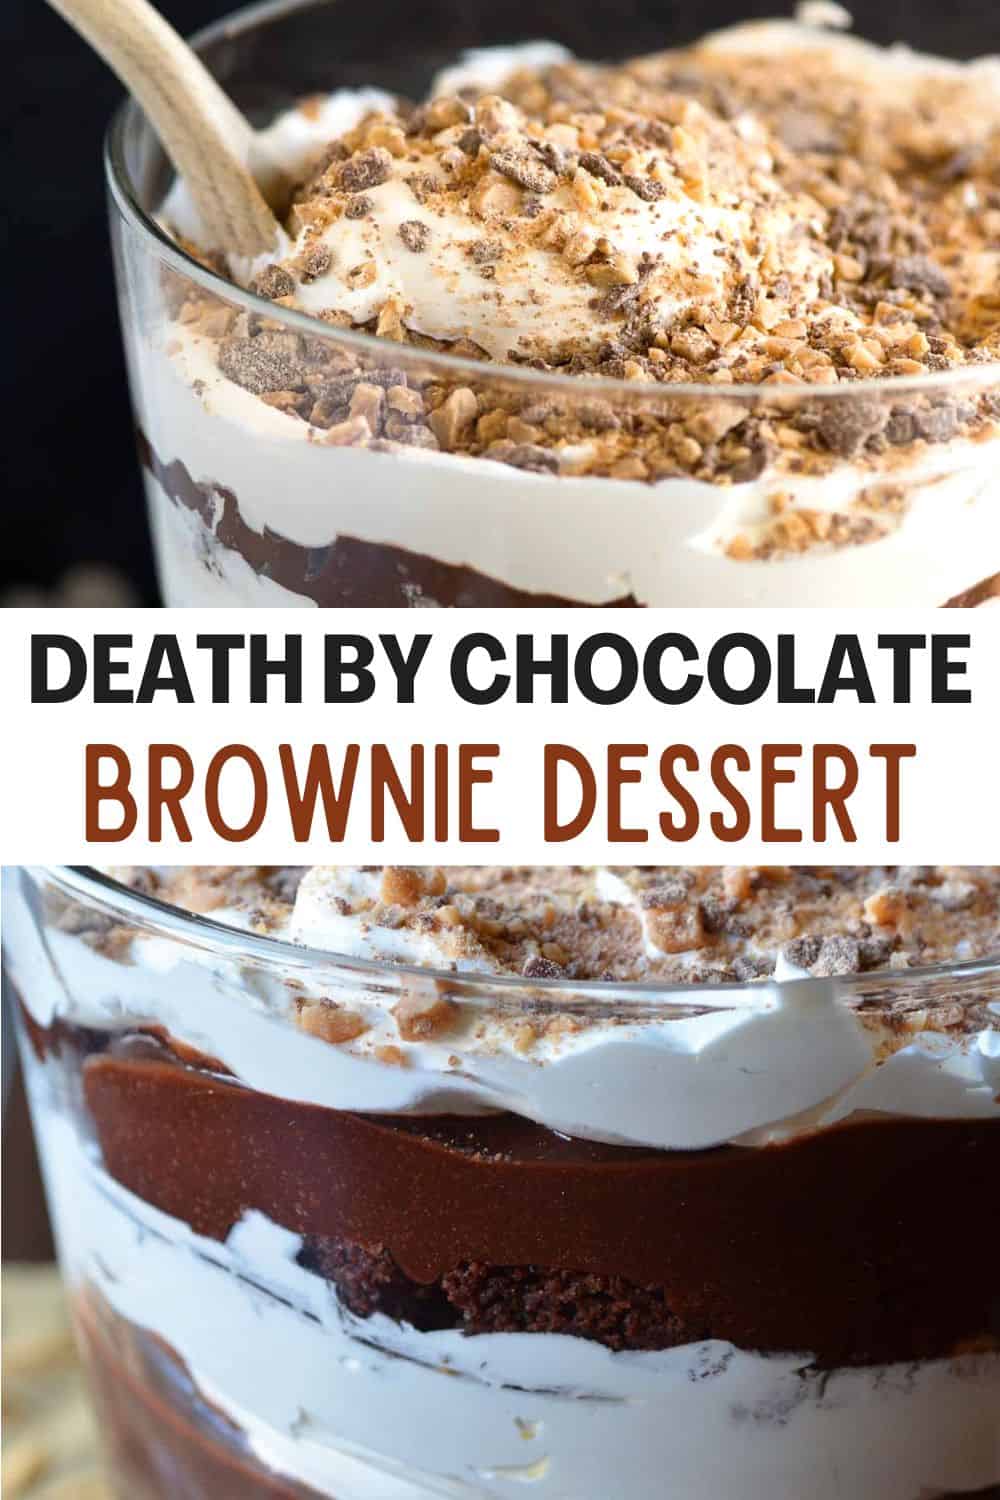 Death by Chocolate Trifle is a dessert with layers of fudgy brownies, chocolate pudding, toffee and cool whip. A chocolate lovers dream.